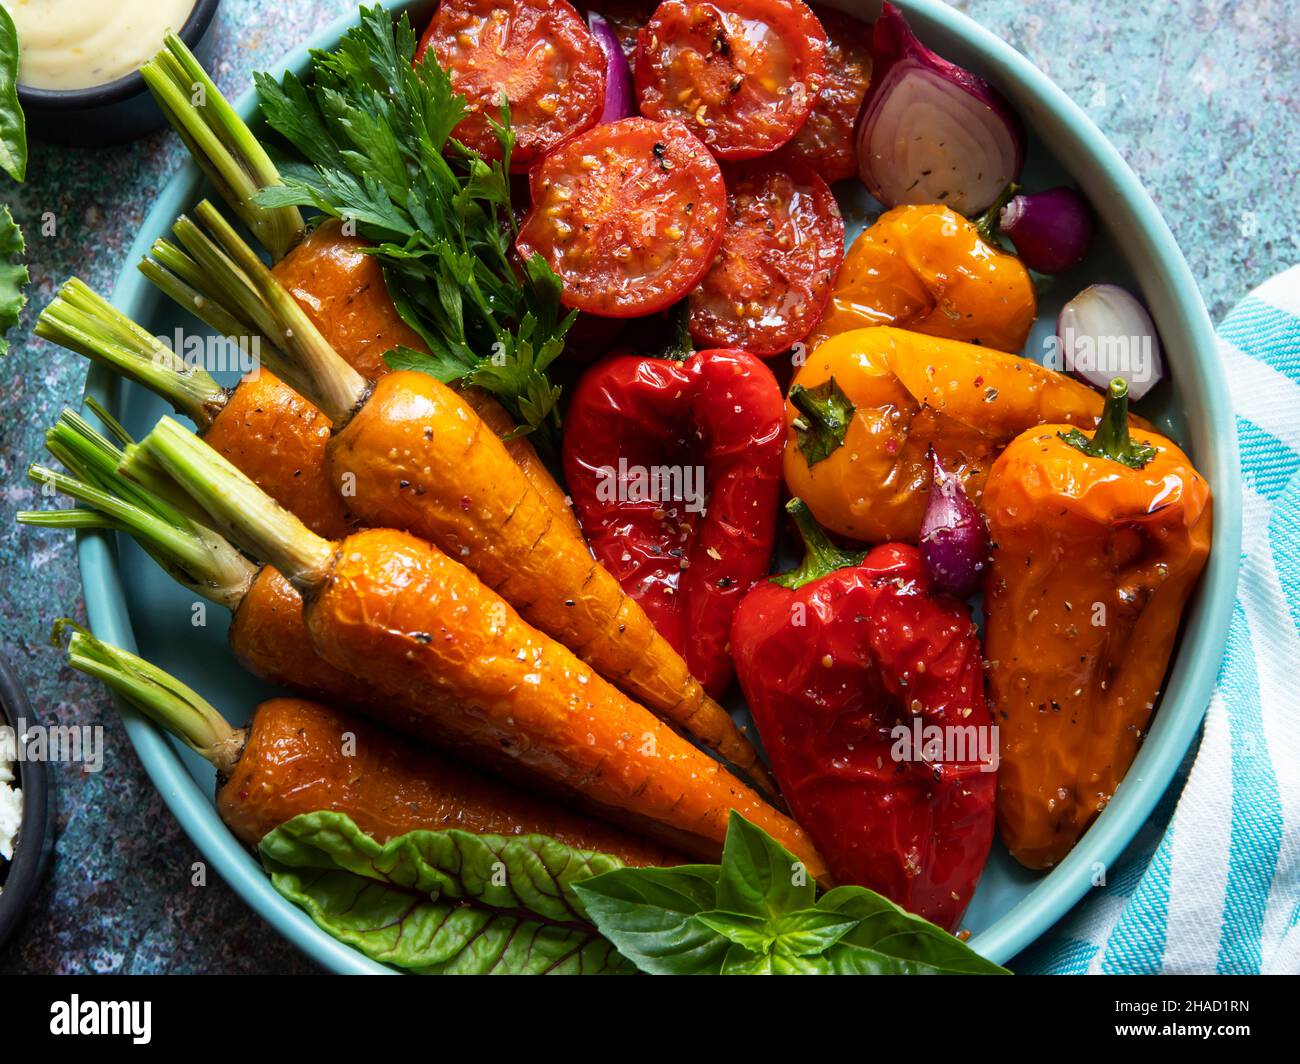 baked grill baby carrots, tomato, bell pepper in a plate, basil and spices vegan dish, close up, white sauce Stock Photo